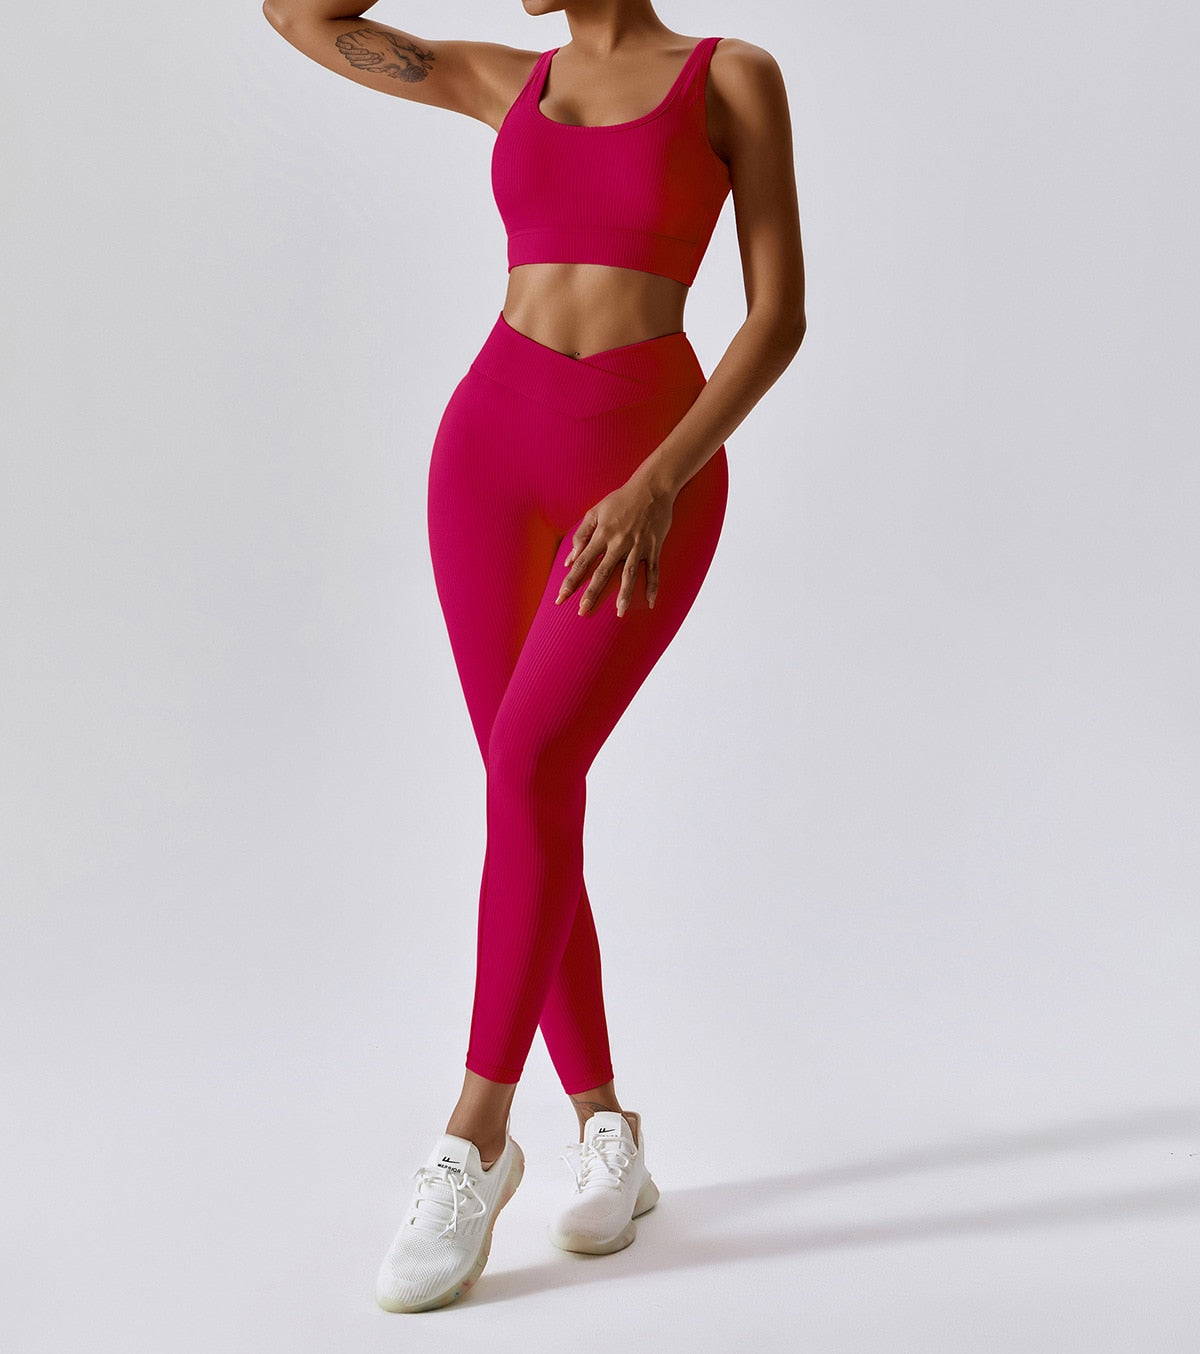 Ribbed Yoga Set Sportswear Women Suit For Fitness Clothing Sports Suit Workout Clothes Tracksuit Sports Outfit Gym Clothing Wear   71.99 EZYSELLA SHOP